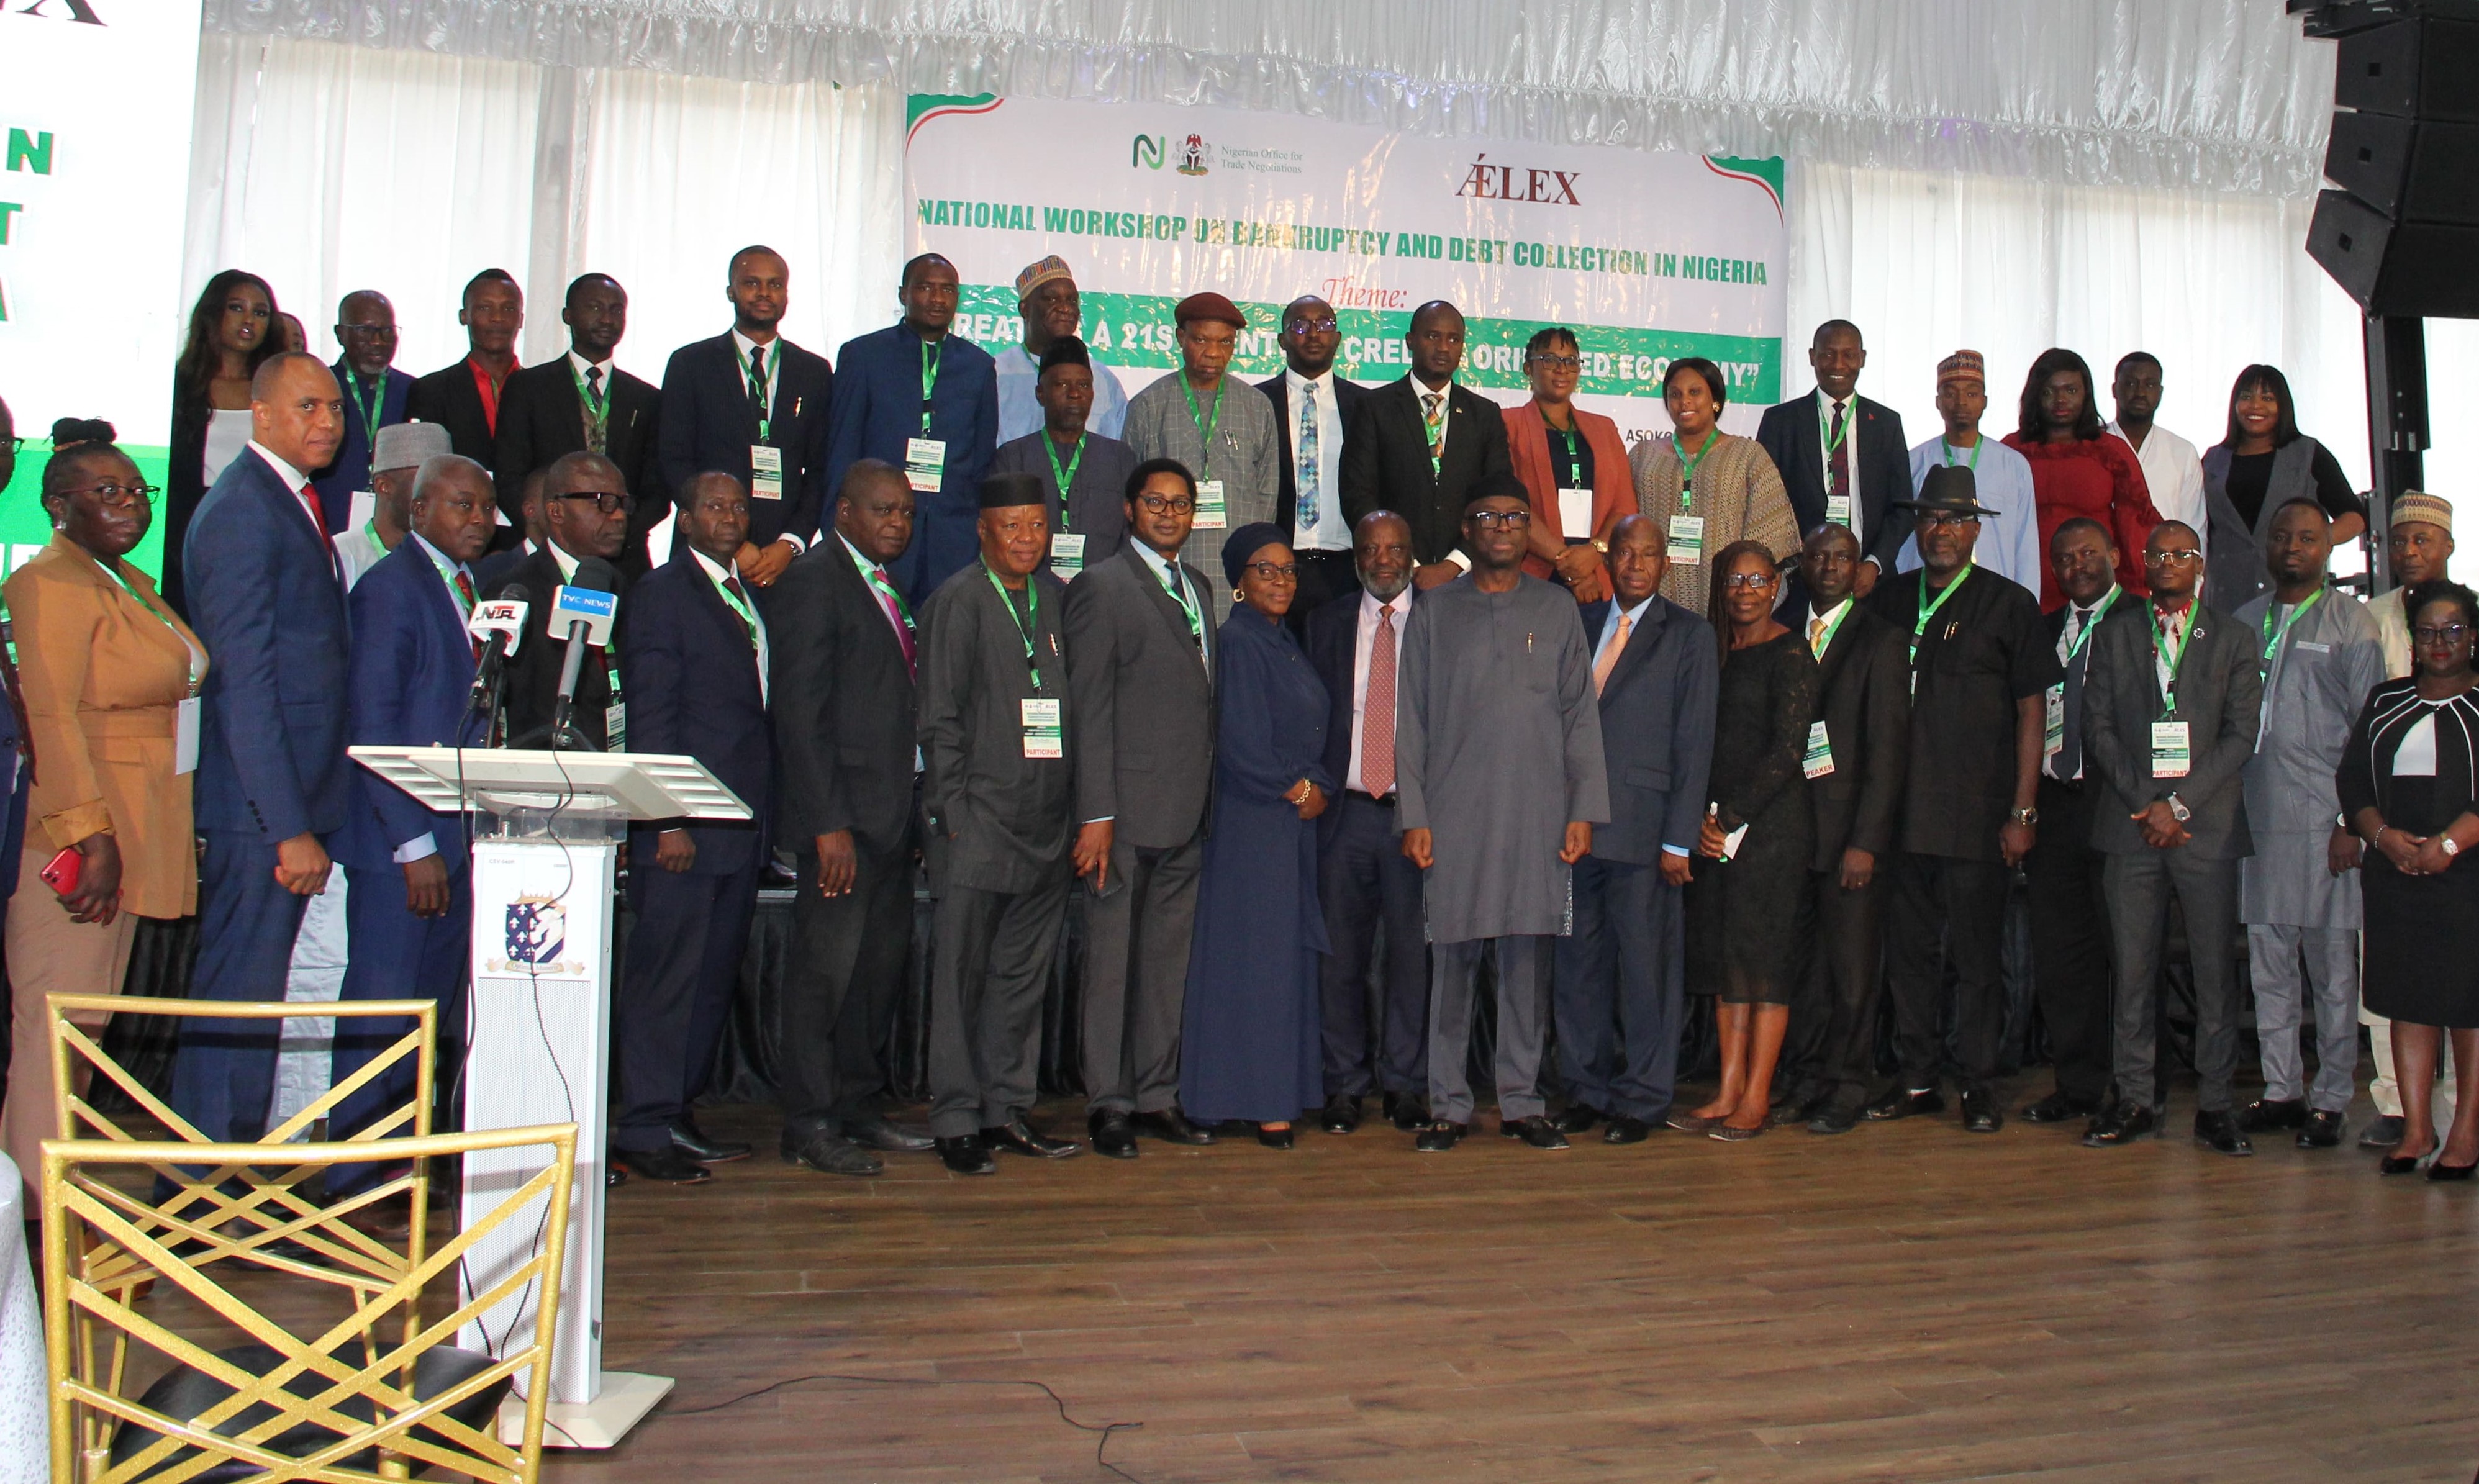 National Workshop on Bankruptcy and Debt Collection in Nigeria